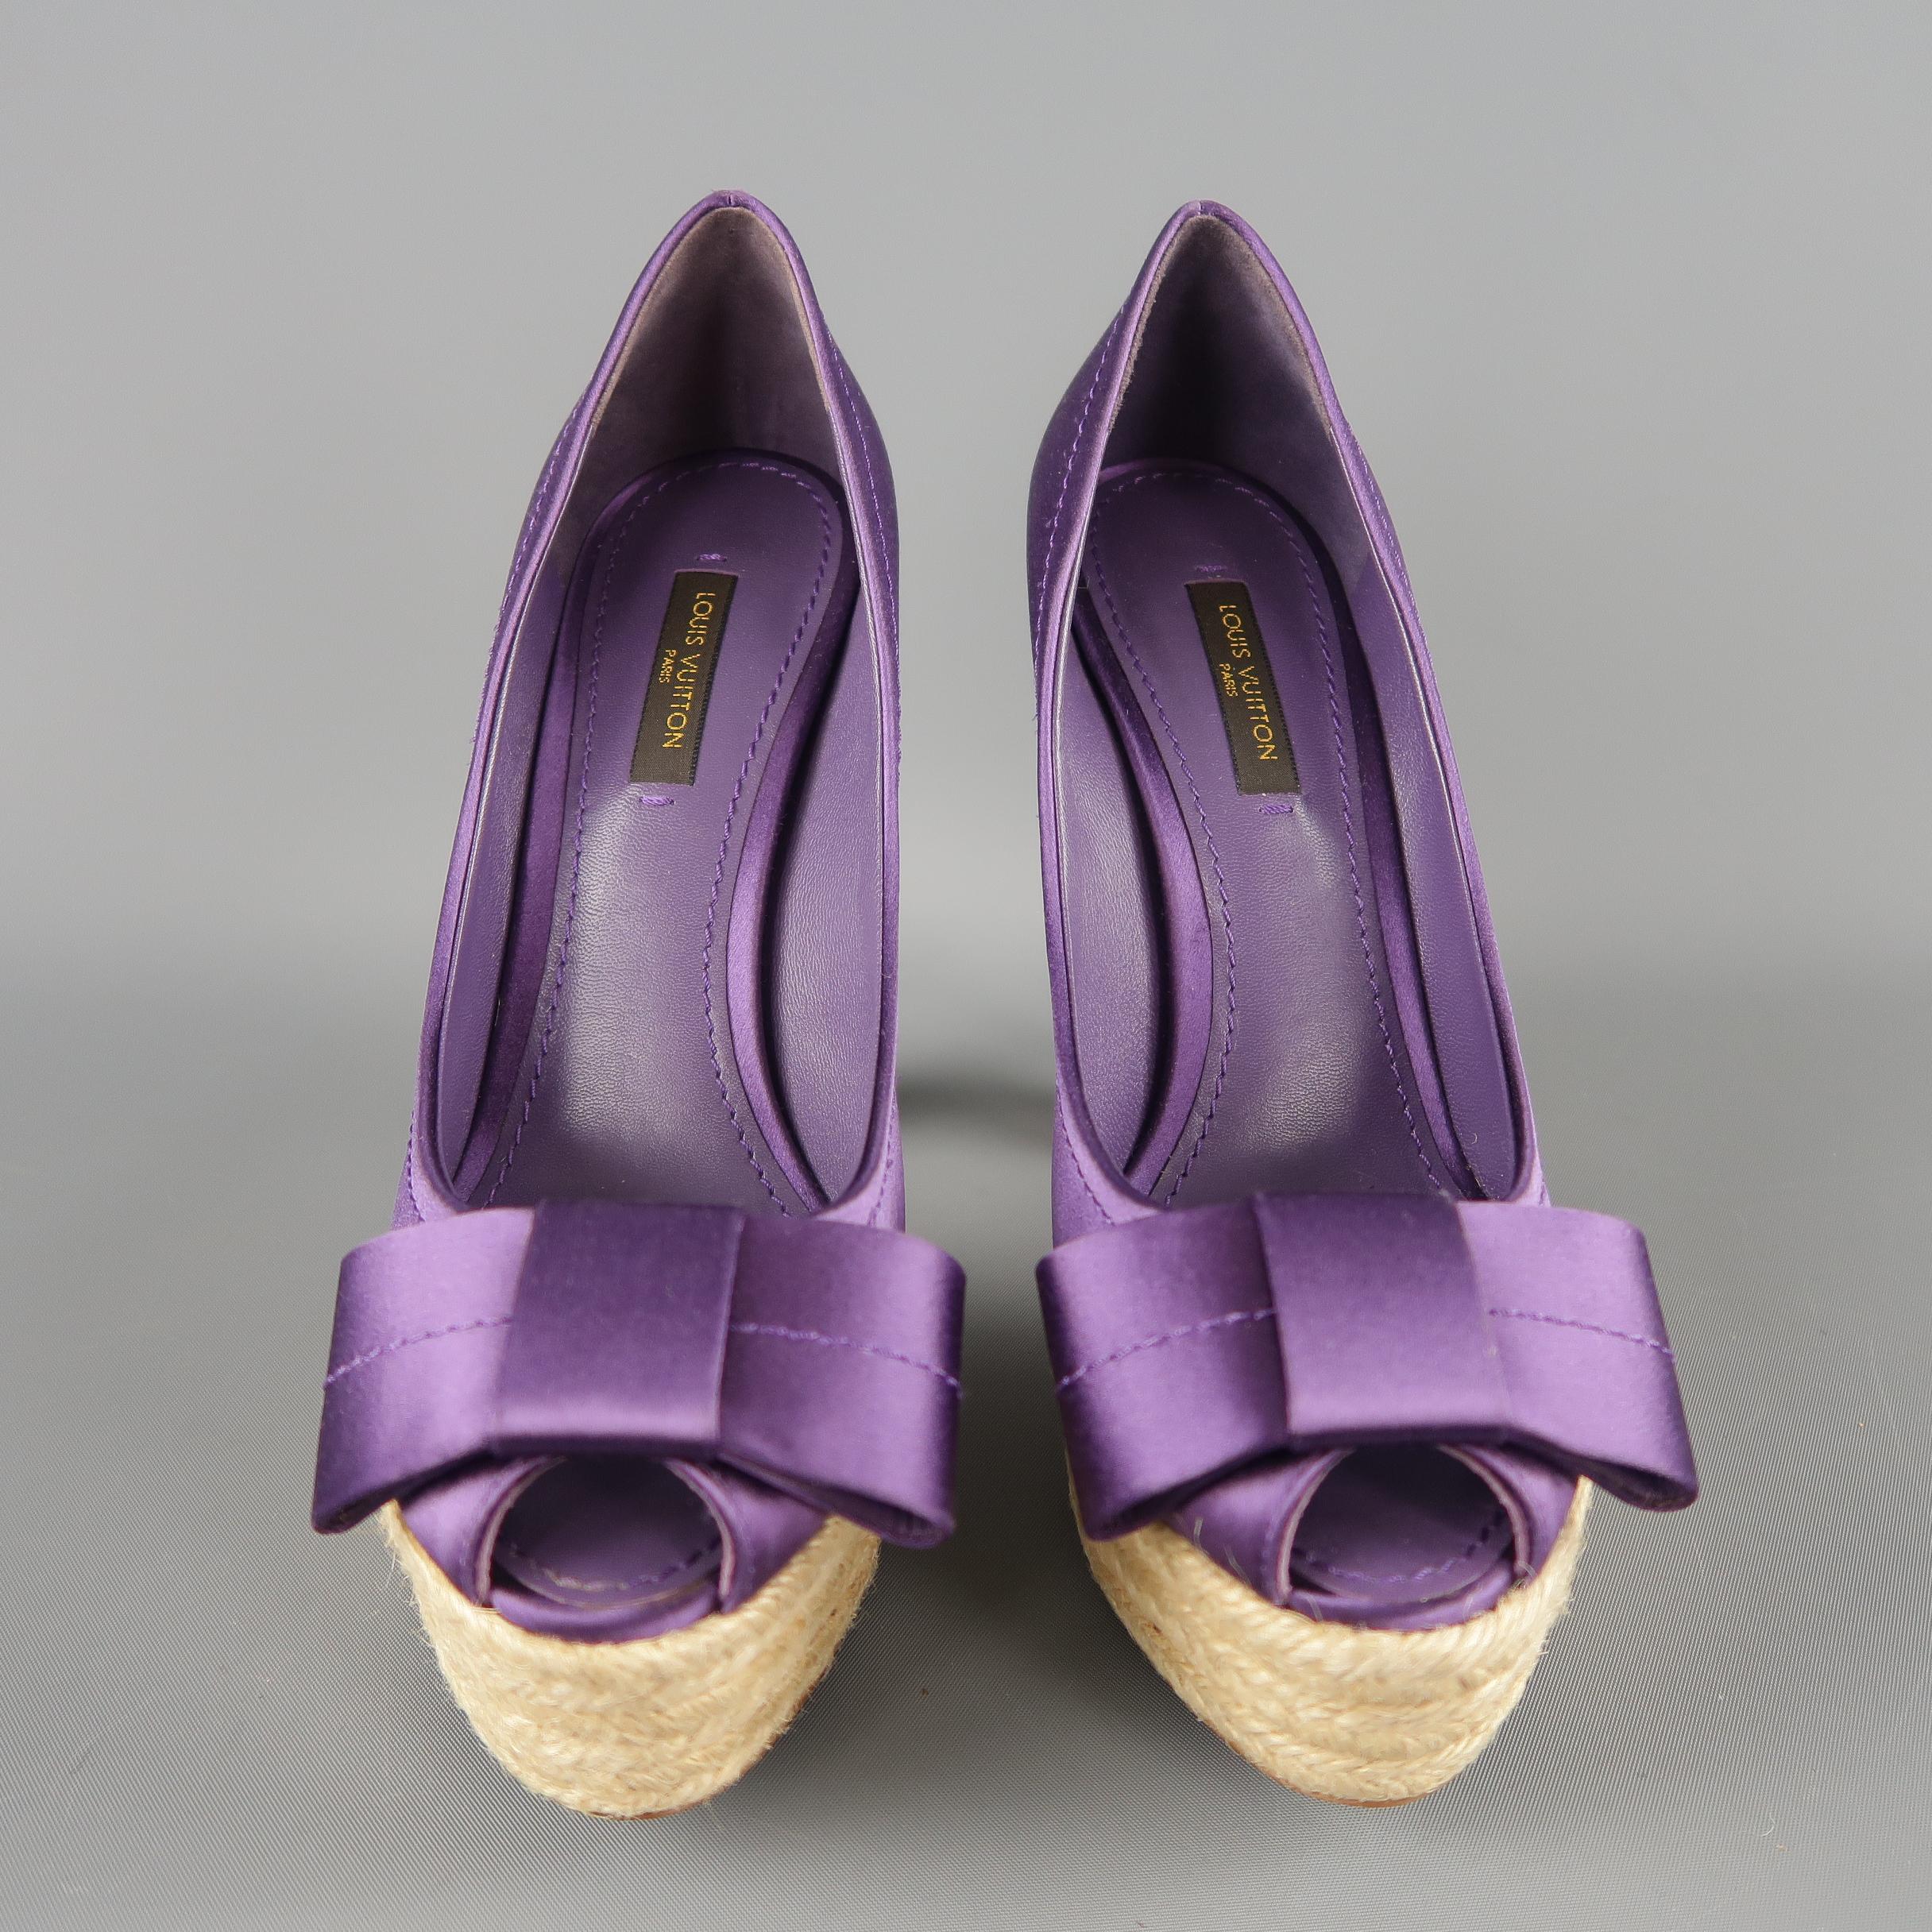 LOUIS VUITTON pumps come in purple silk satin with a peep toe detailed with a bow, gold tone metal monogram heel detail, and braided espadrille platform and chunky heel. Made in Italy.
 
New without Tags.
Marked: IT 36
 
Heel: 5 in.
Platform: 1.25